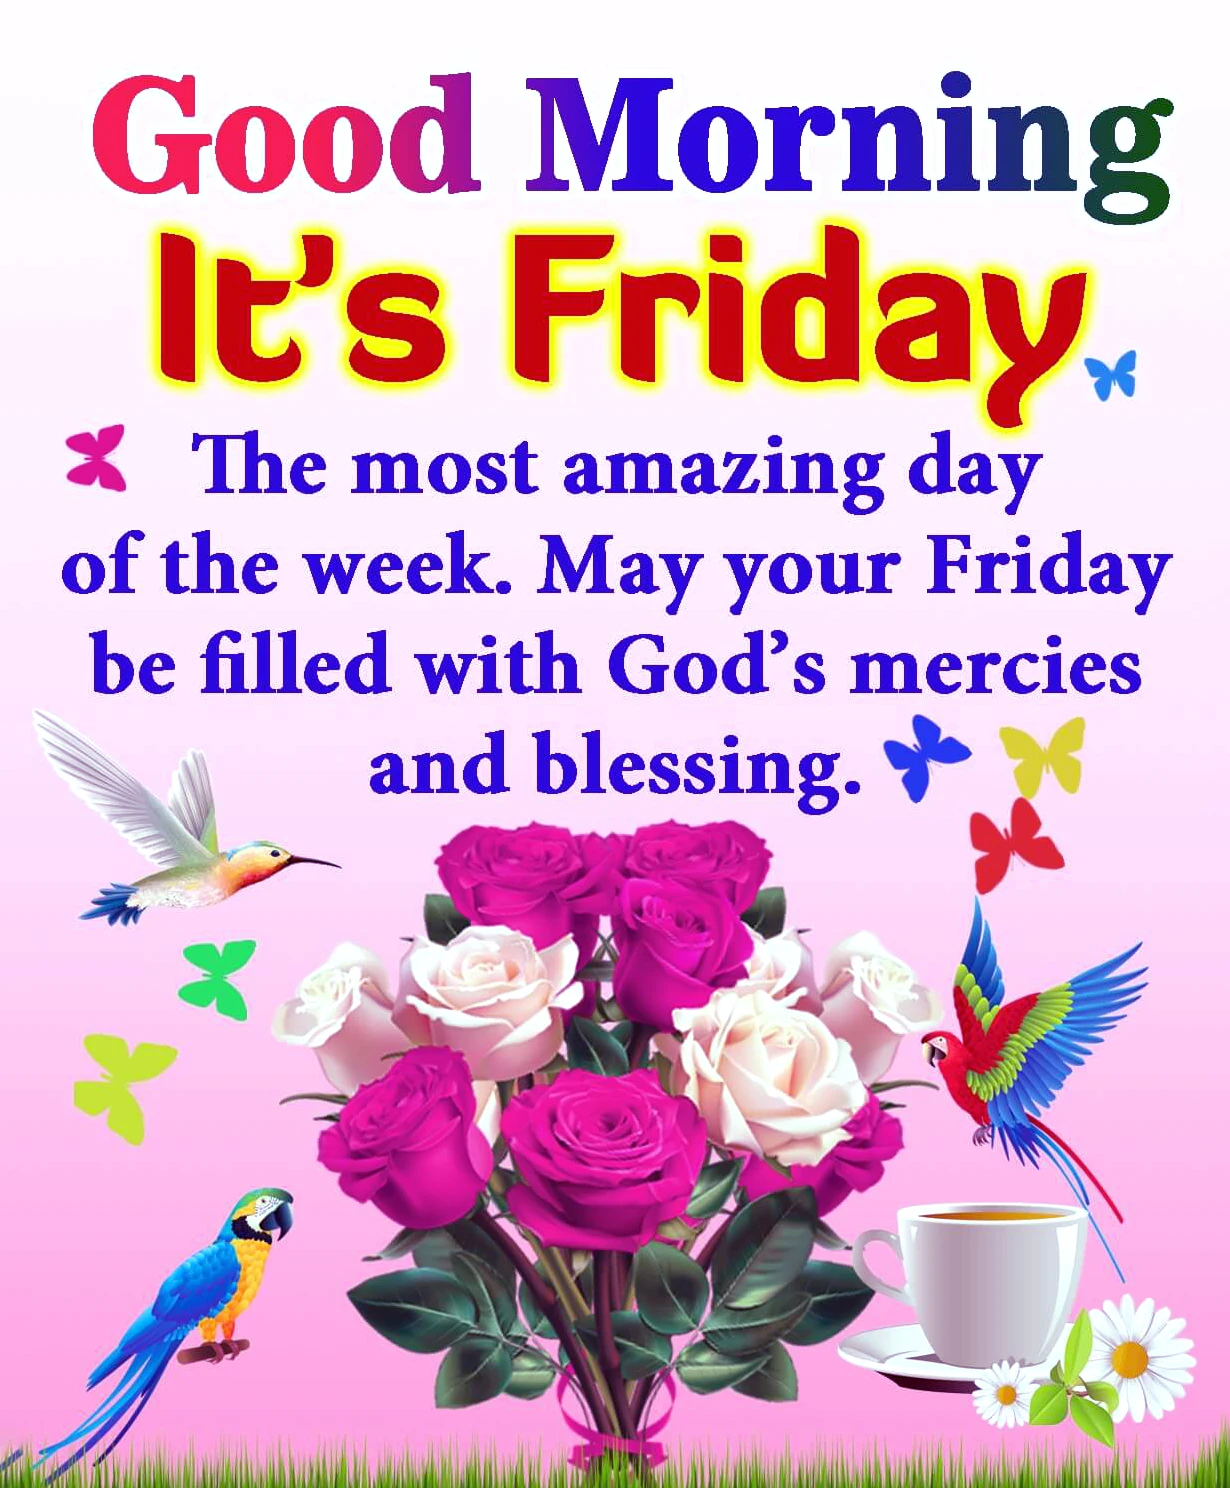 Good morning. Its Friday. _ the most amazing day of the week may your Friday be filled with Gods marcies and blessing